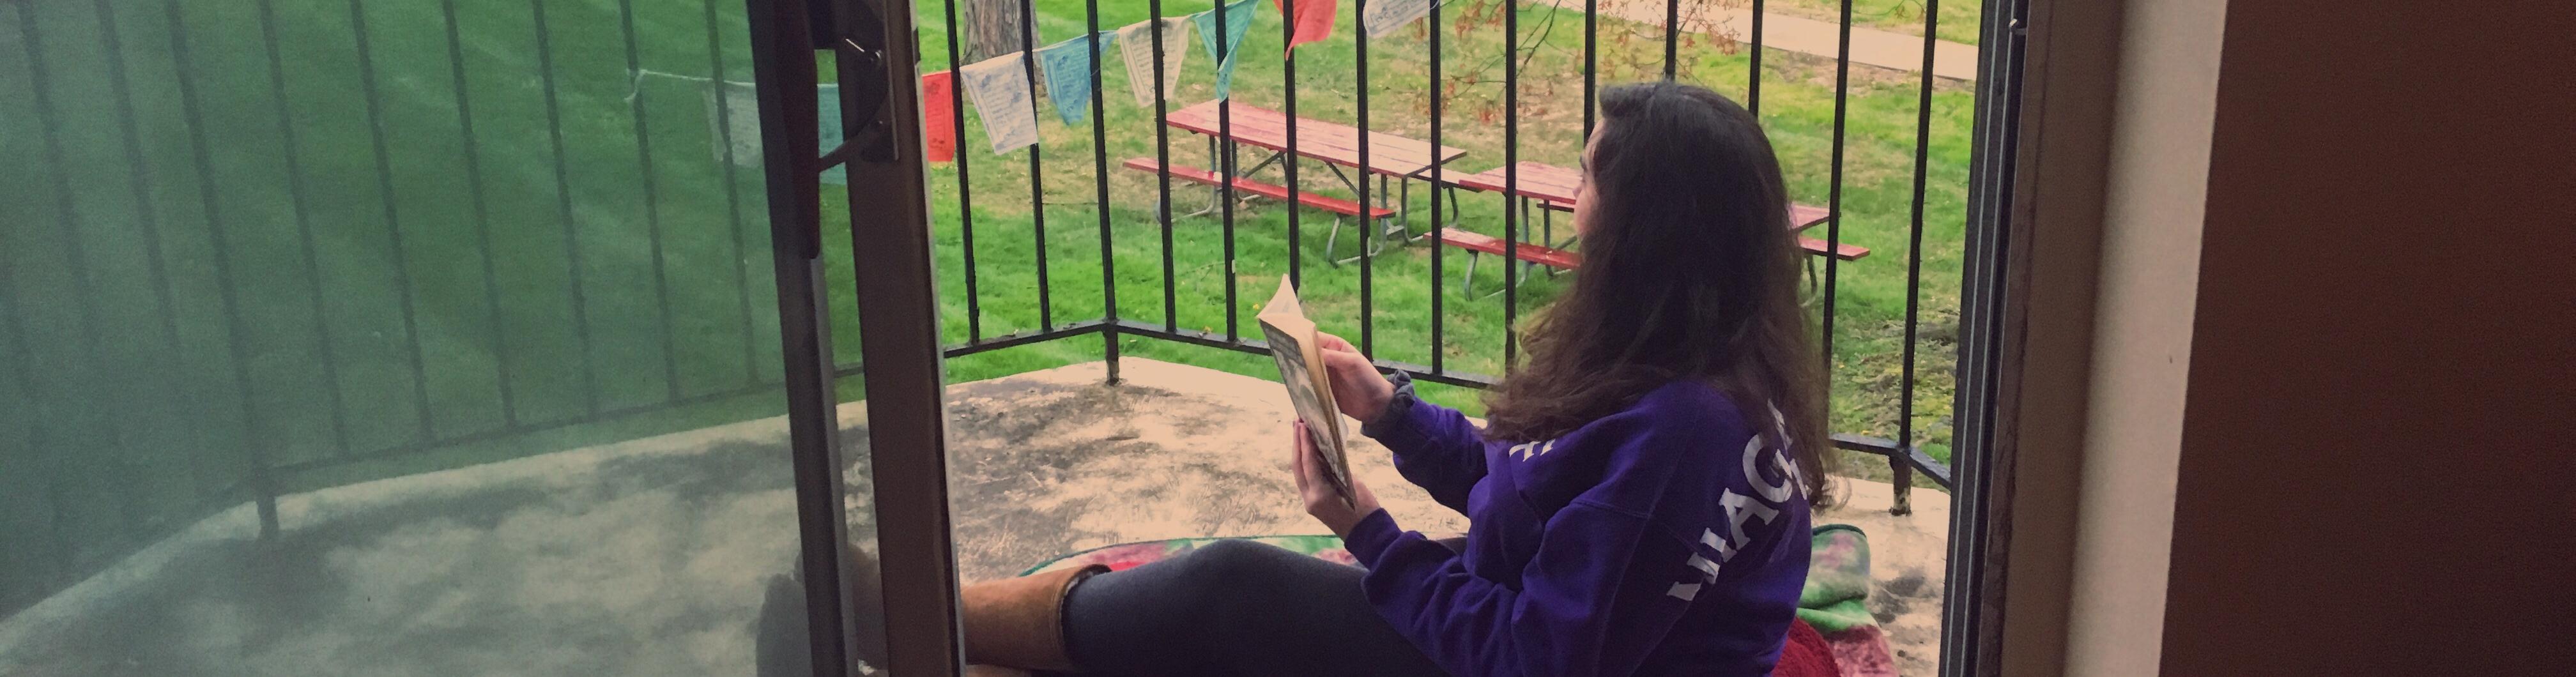 A person reading on a porch from their apartment.